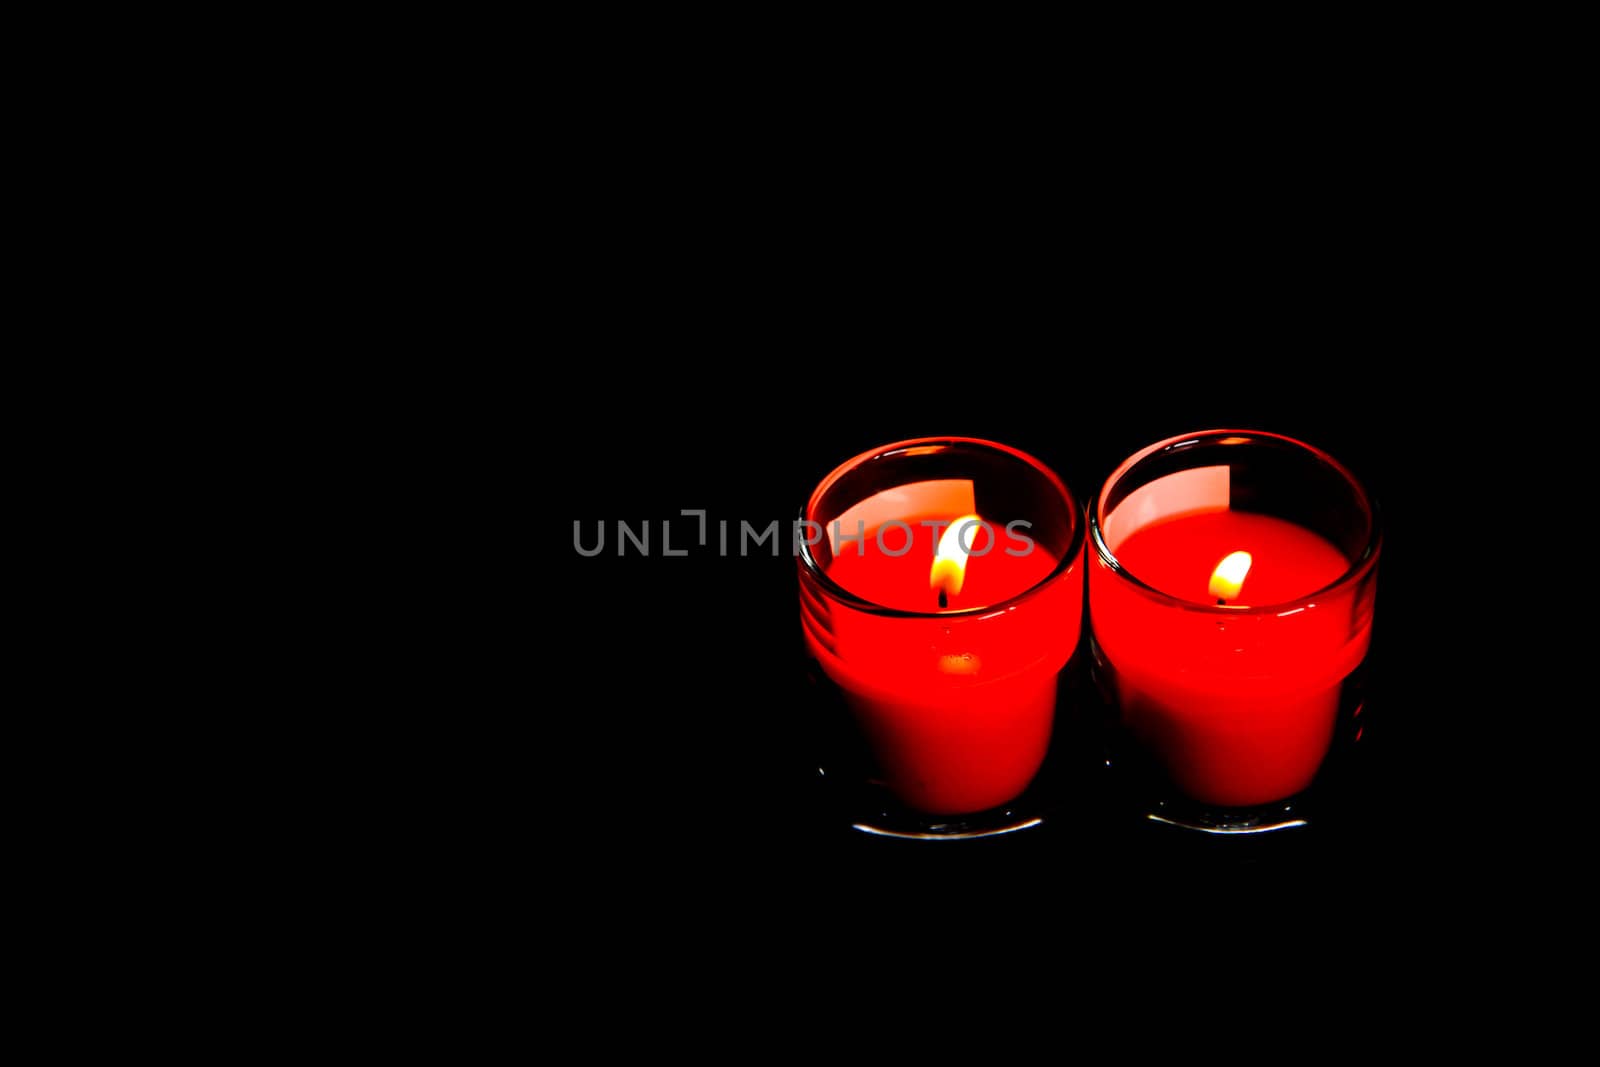 Candle by Photoguide